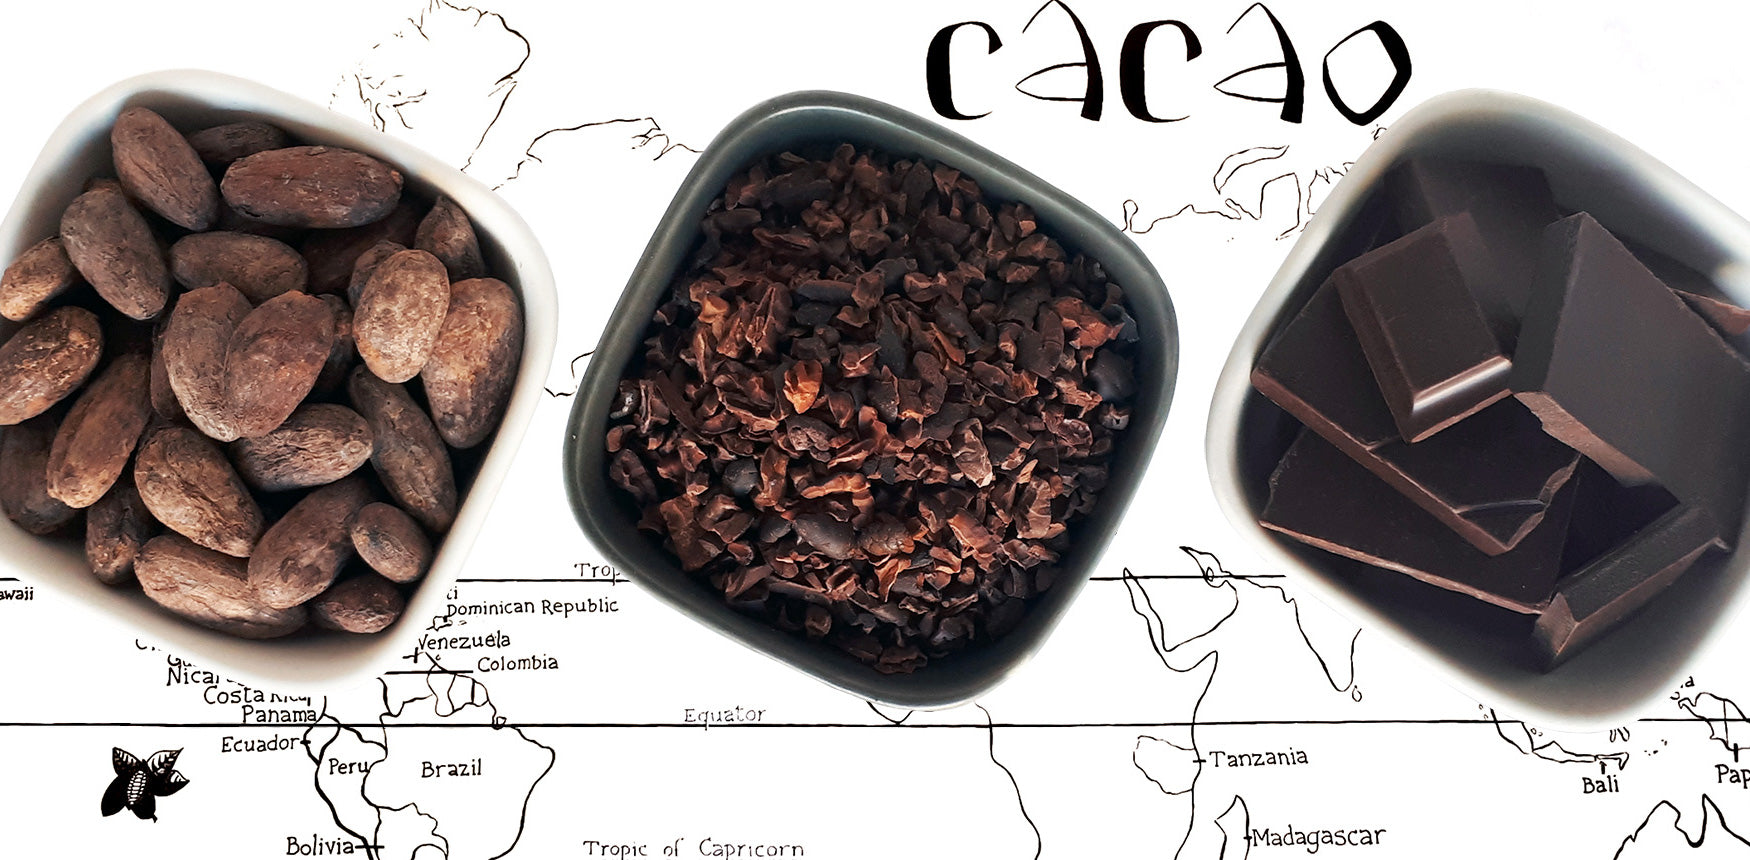 Image of cocoa beans, cocoa nibs and bean to bar chocolate